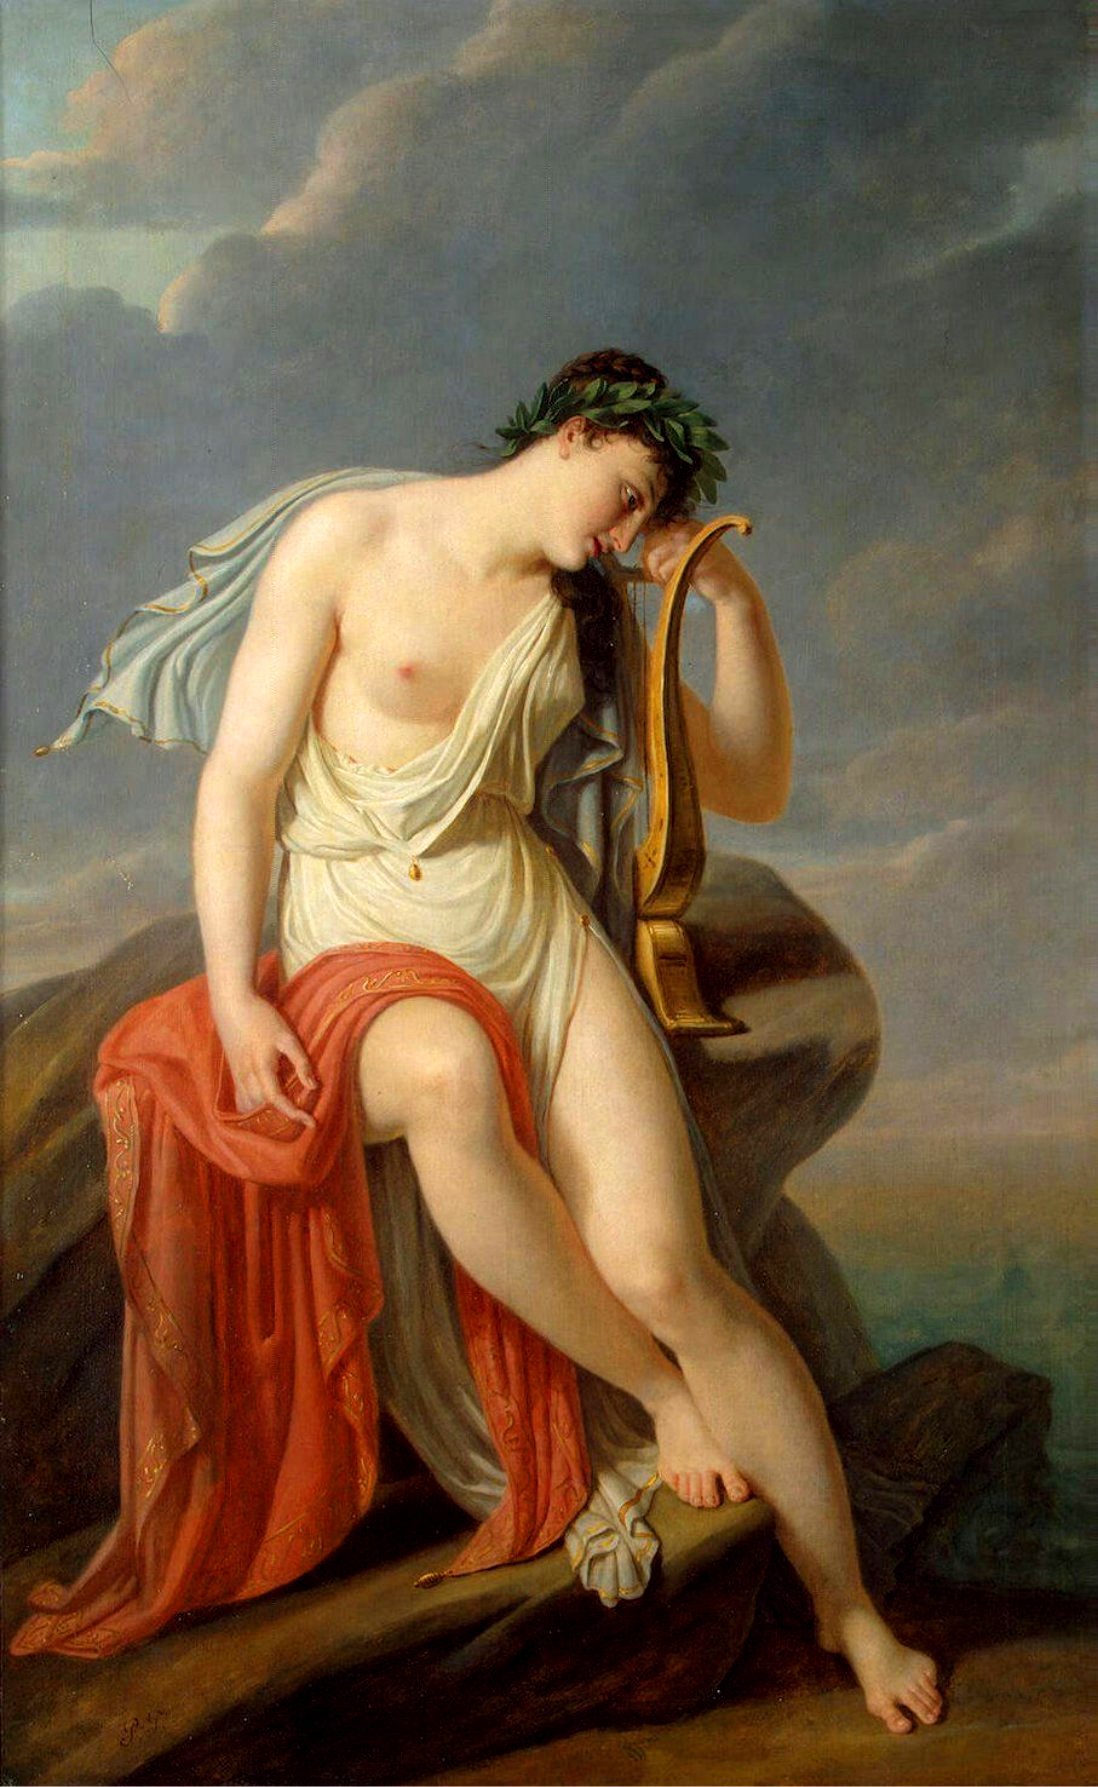 Sappho On the Leucadian Cliff by Pierre-Narcisse Guérin, c. 1800-10